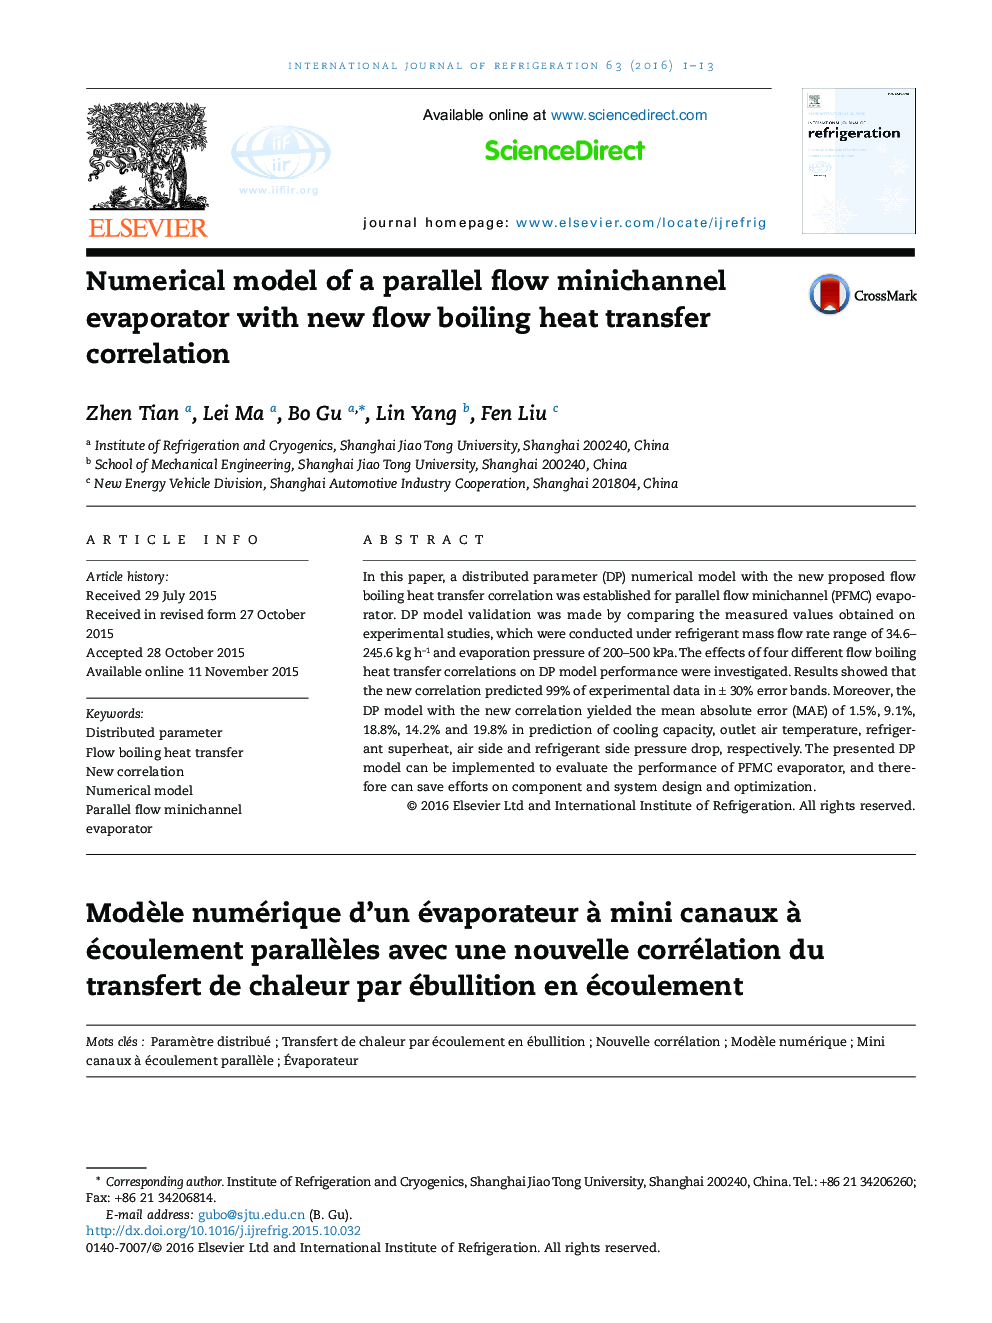 Numerical model of a parallel flow minichannel evaporator with new flow boiling heat transfer correlation